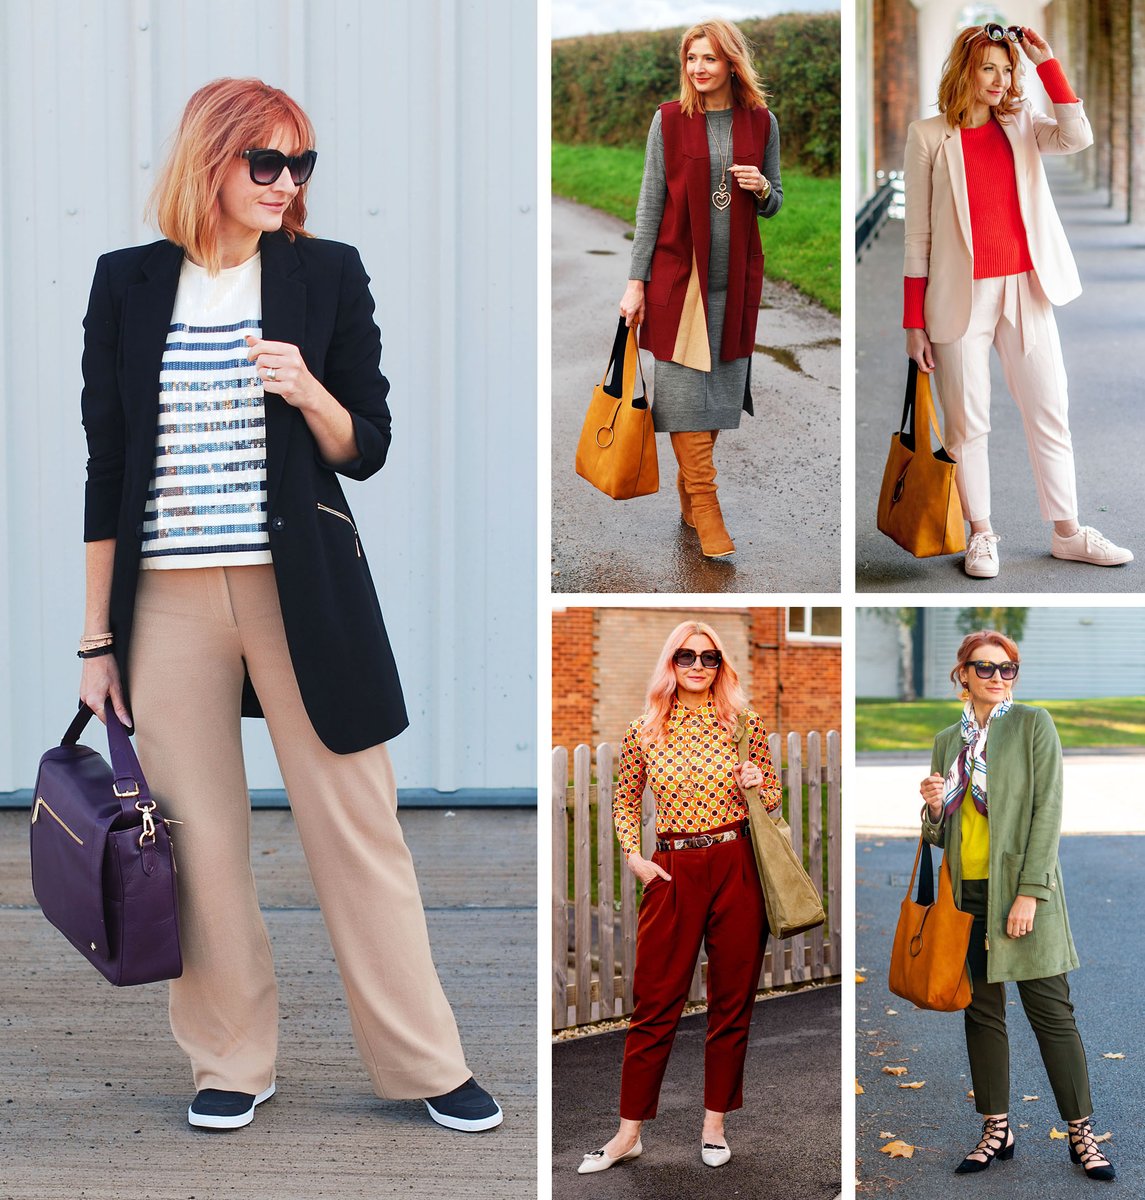 With a few simple pieces and basic structure, it may be easier to nail a post-pandemic working wardrobe than you think: 36 Ideas for What to Wear to the Office Post-Pandemic notdressedaslamb.com/2022/05/36-ide…